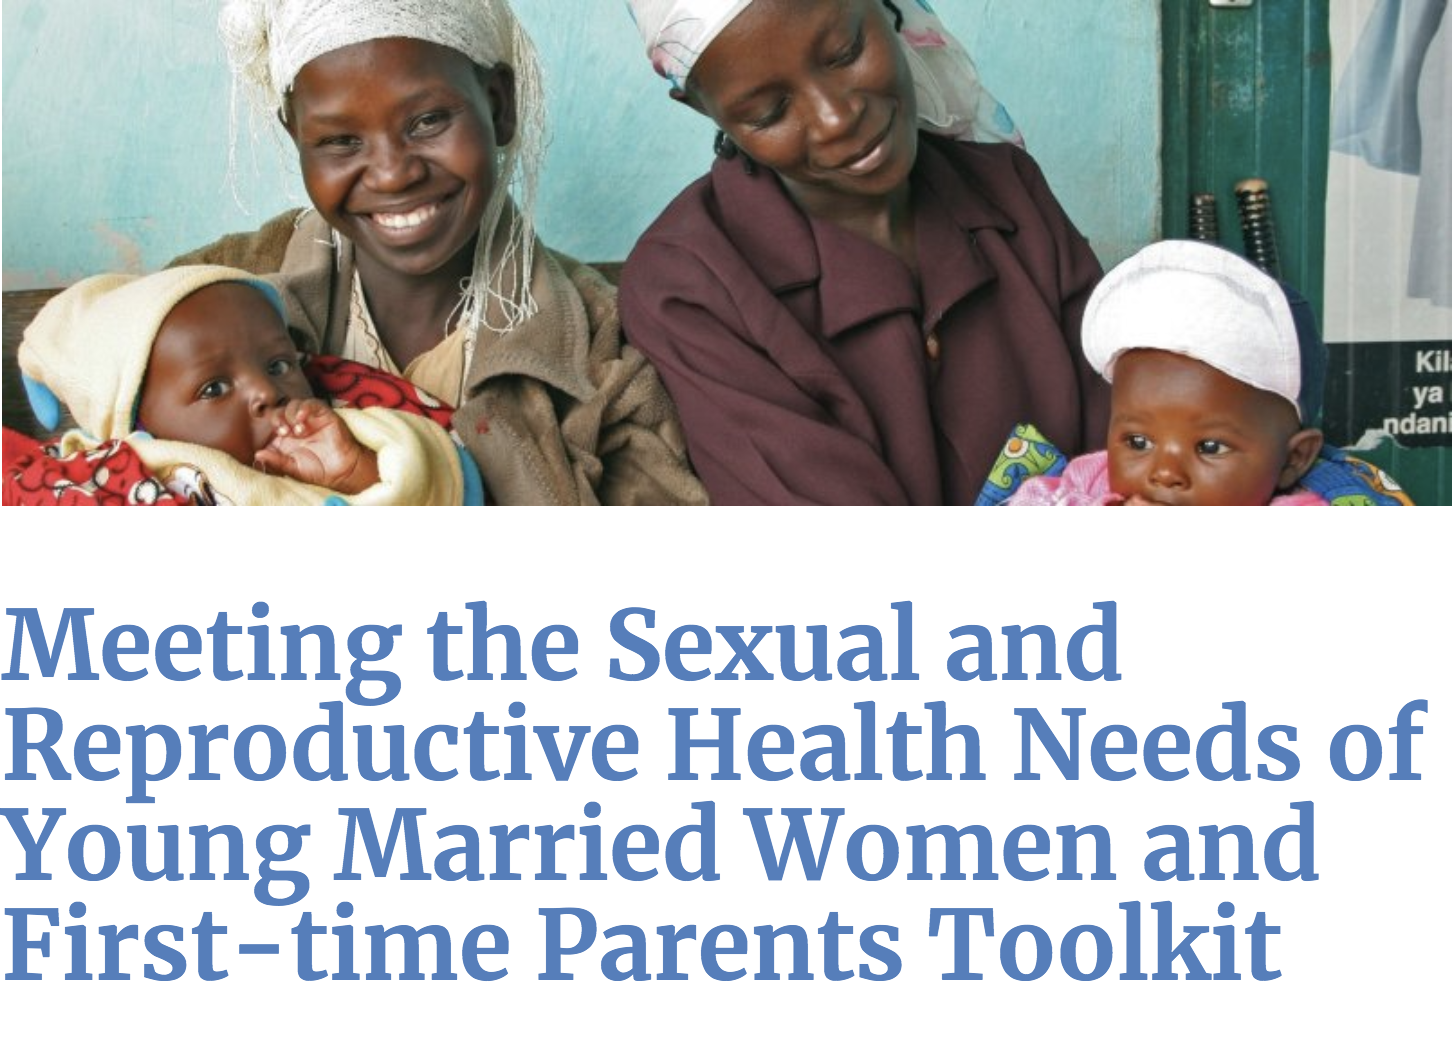 Meeting the Sexual and Reproductive Health Needs of Young Married Women and First-time Parents Toolkit